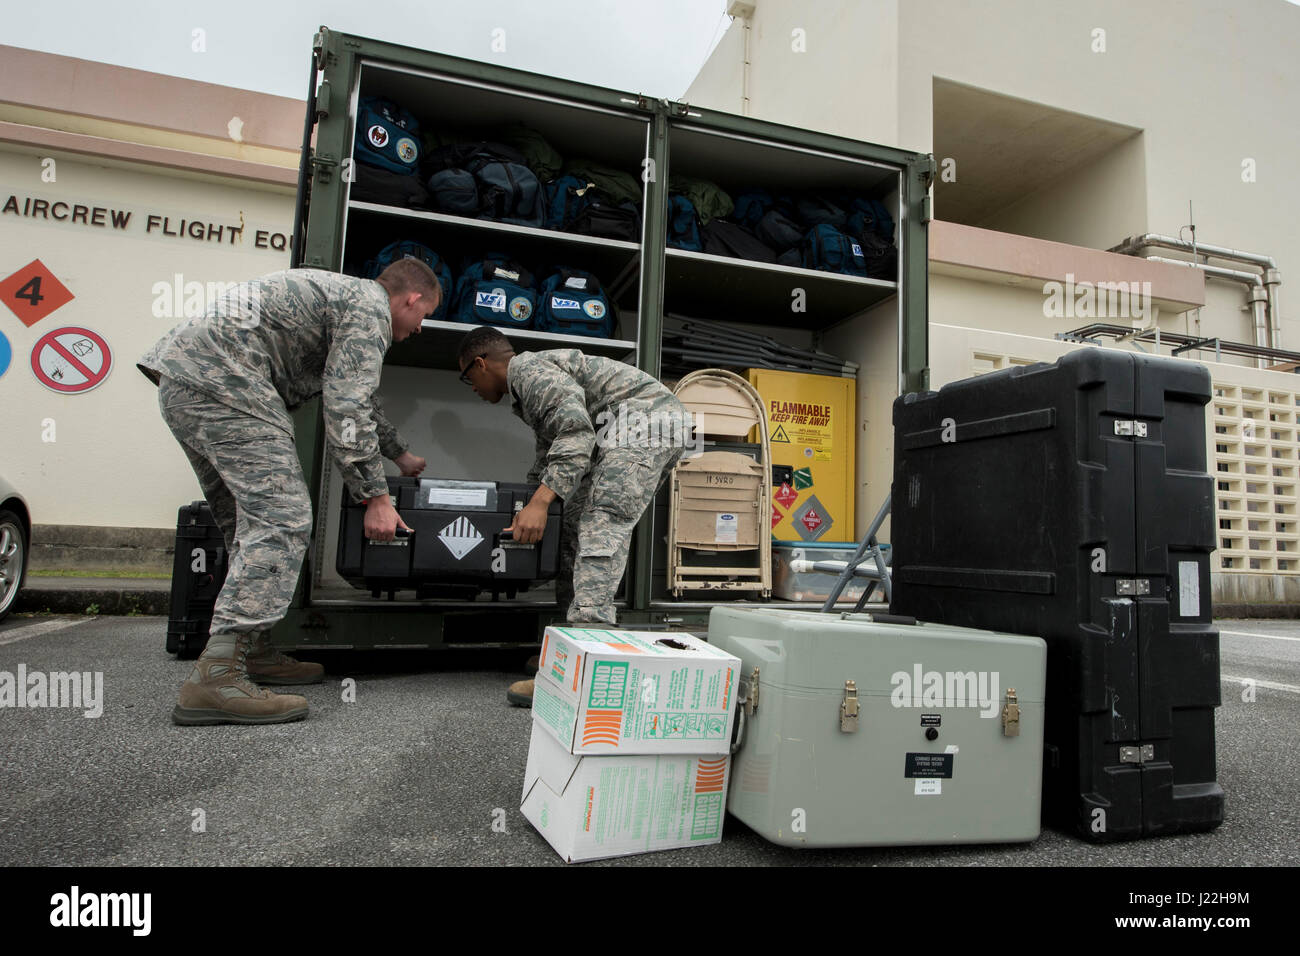 U.S. Air Force Senior Airman Joseph Gago and Airman Nigel Simpson, 18th Operations Support Squadron aircrew flight equipment technicians assigned to the 44th Fighter Squadron, stow away equipment April 18, 2017, at Kadena Air Base, Japan. The AFE team prepares members of the 44th FS to participate in aviation training relocation programs in different parts of the world, such as Guam. (U.S. Air Force photo by Senior Airman John Linzmeier) Stock Photo